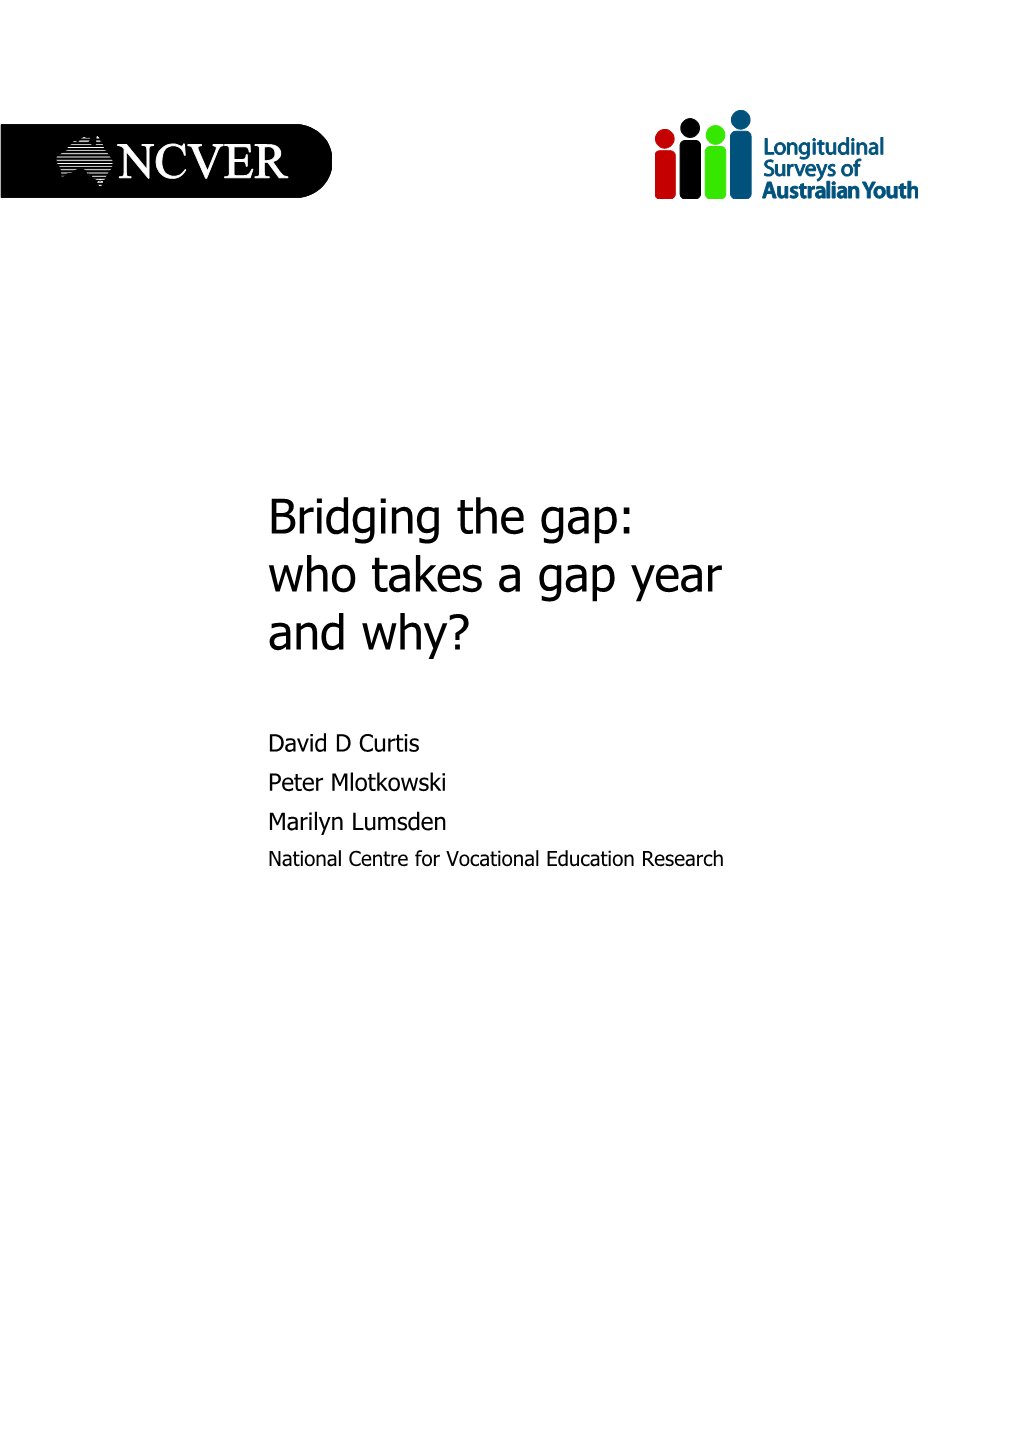 Bridging the Gap: Who Takes a Gap Year and Why?